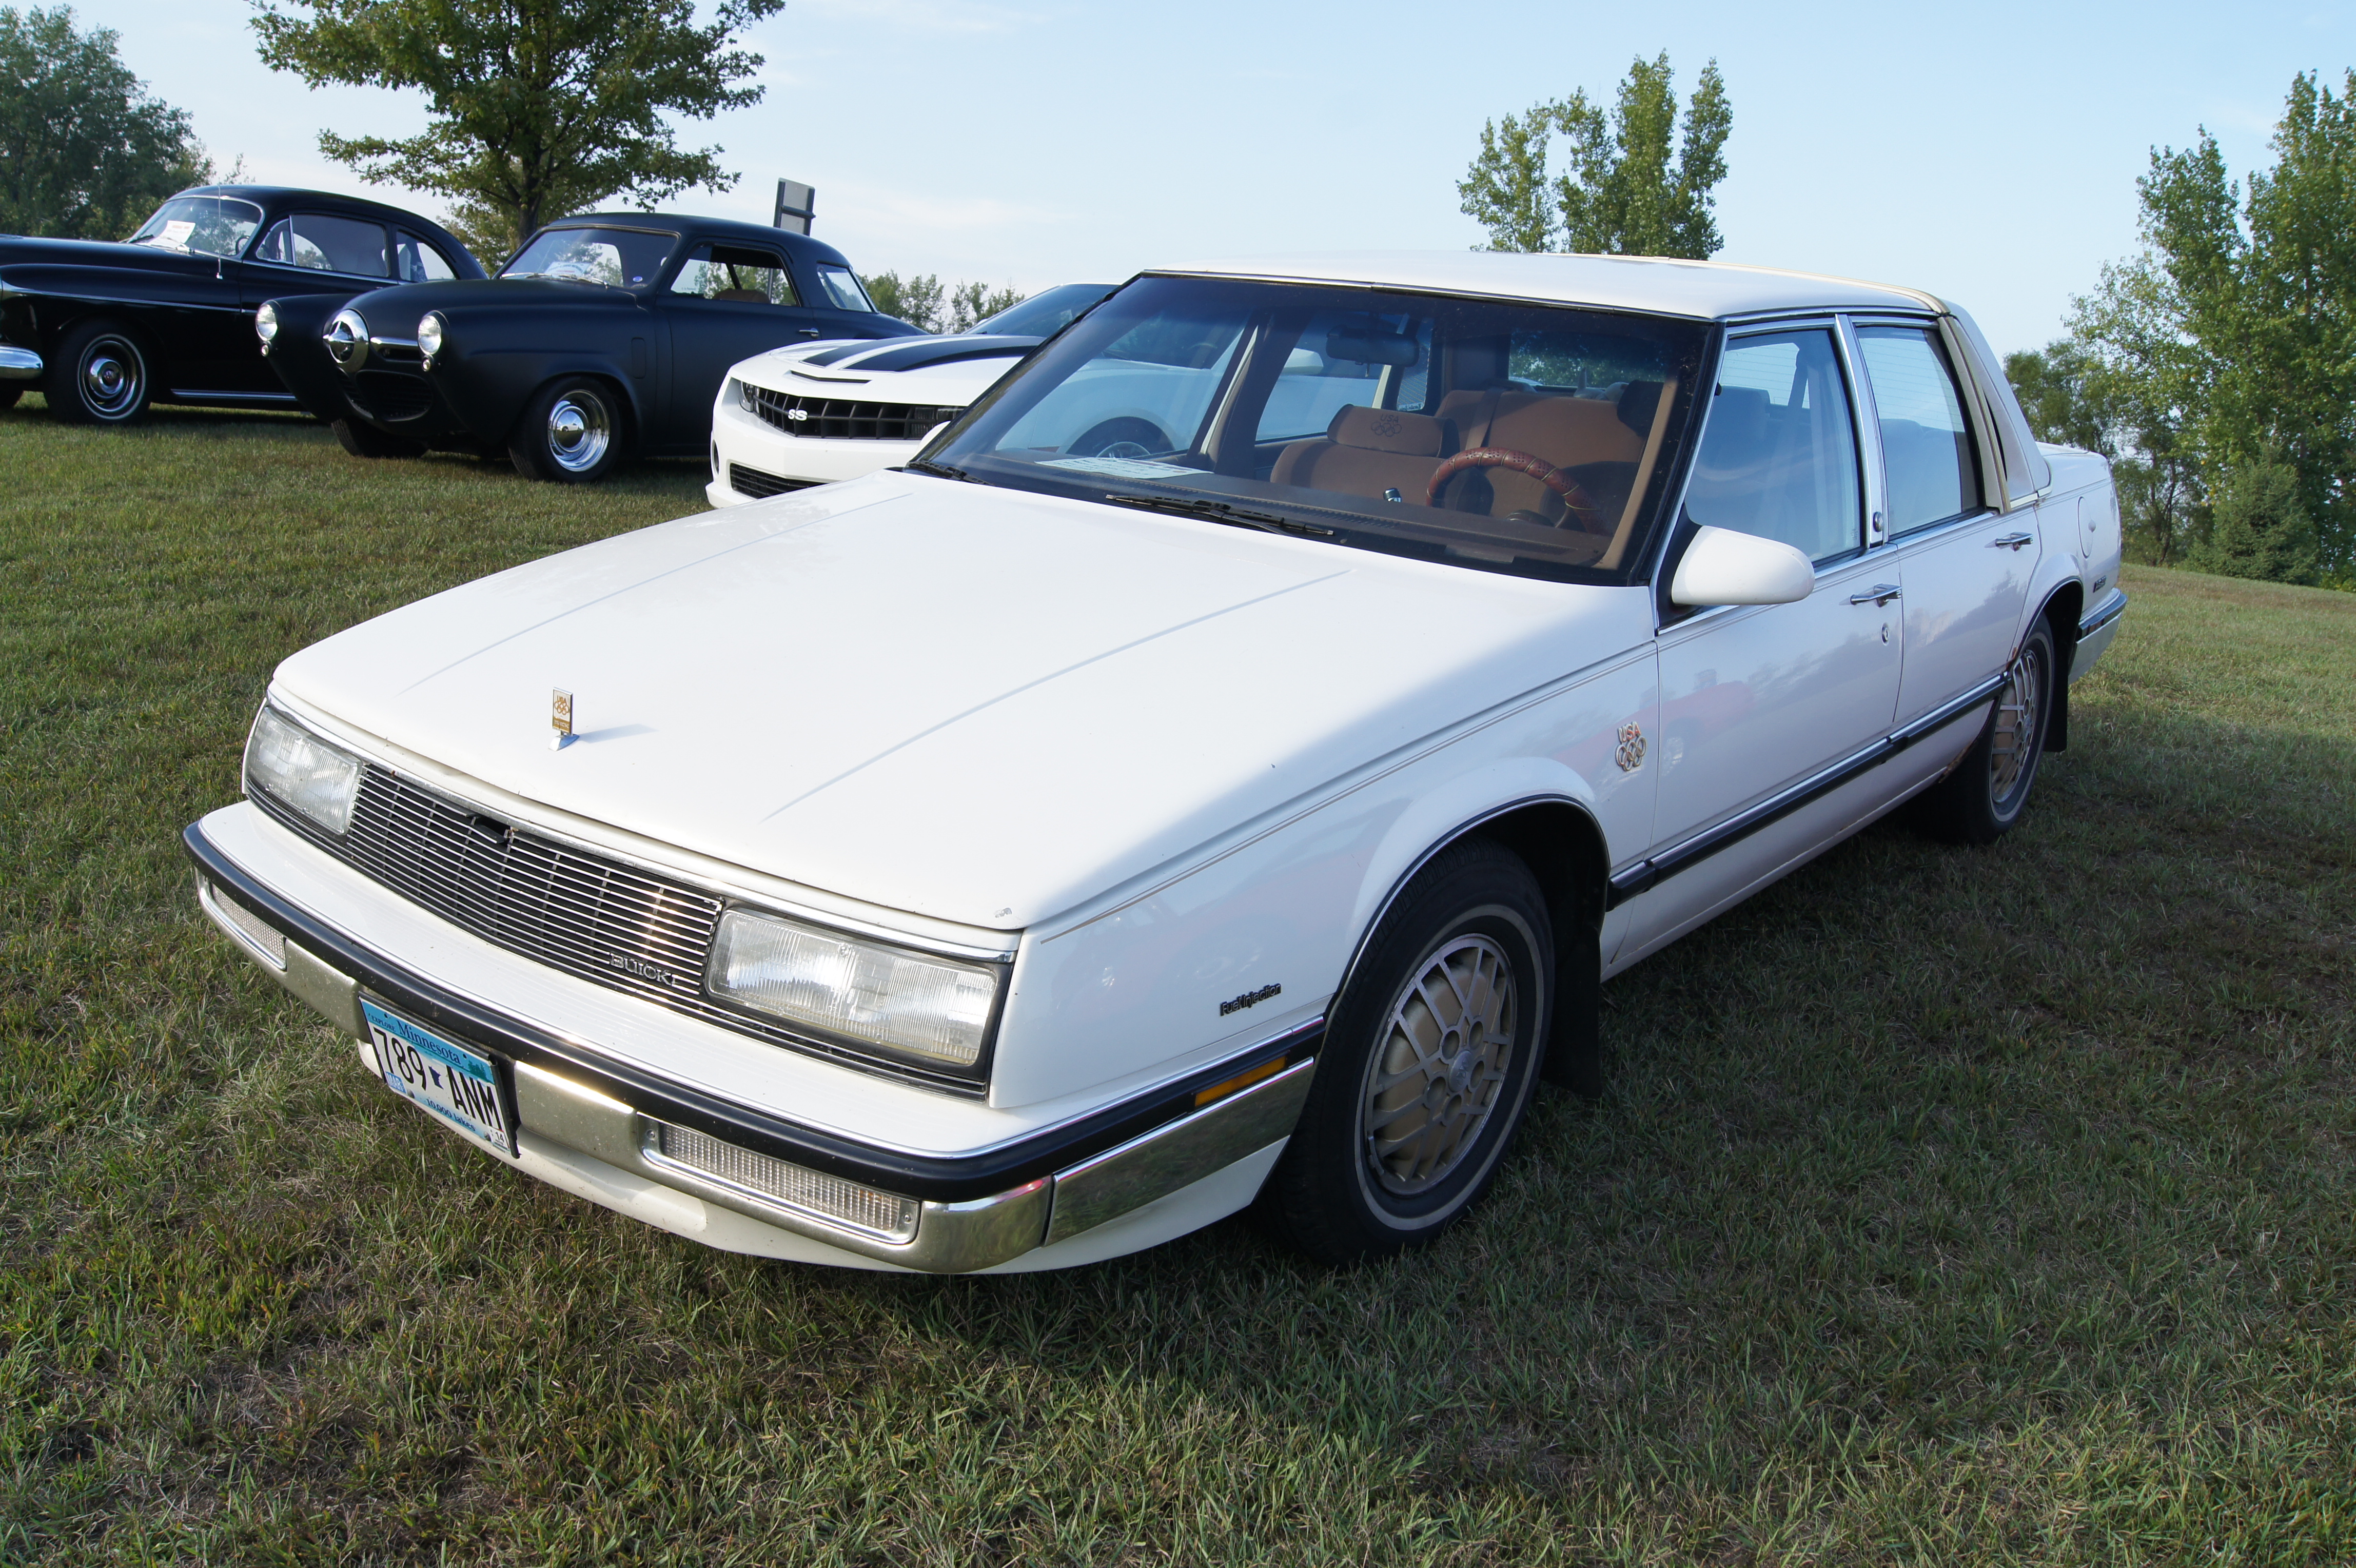 1988 Buick LeSabre Olympic Edition (9844831866).jpg. 